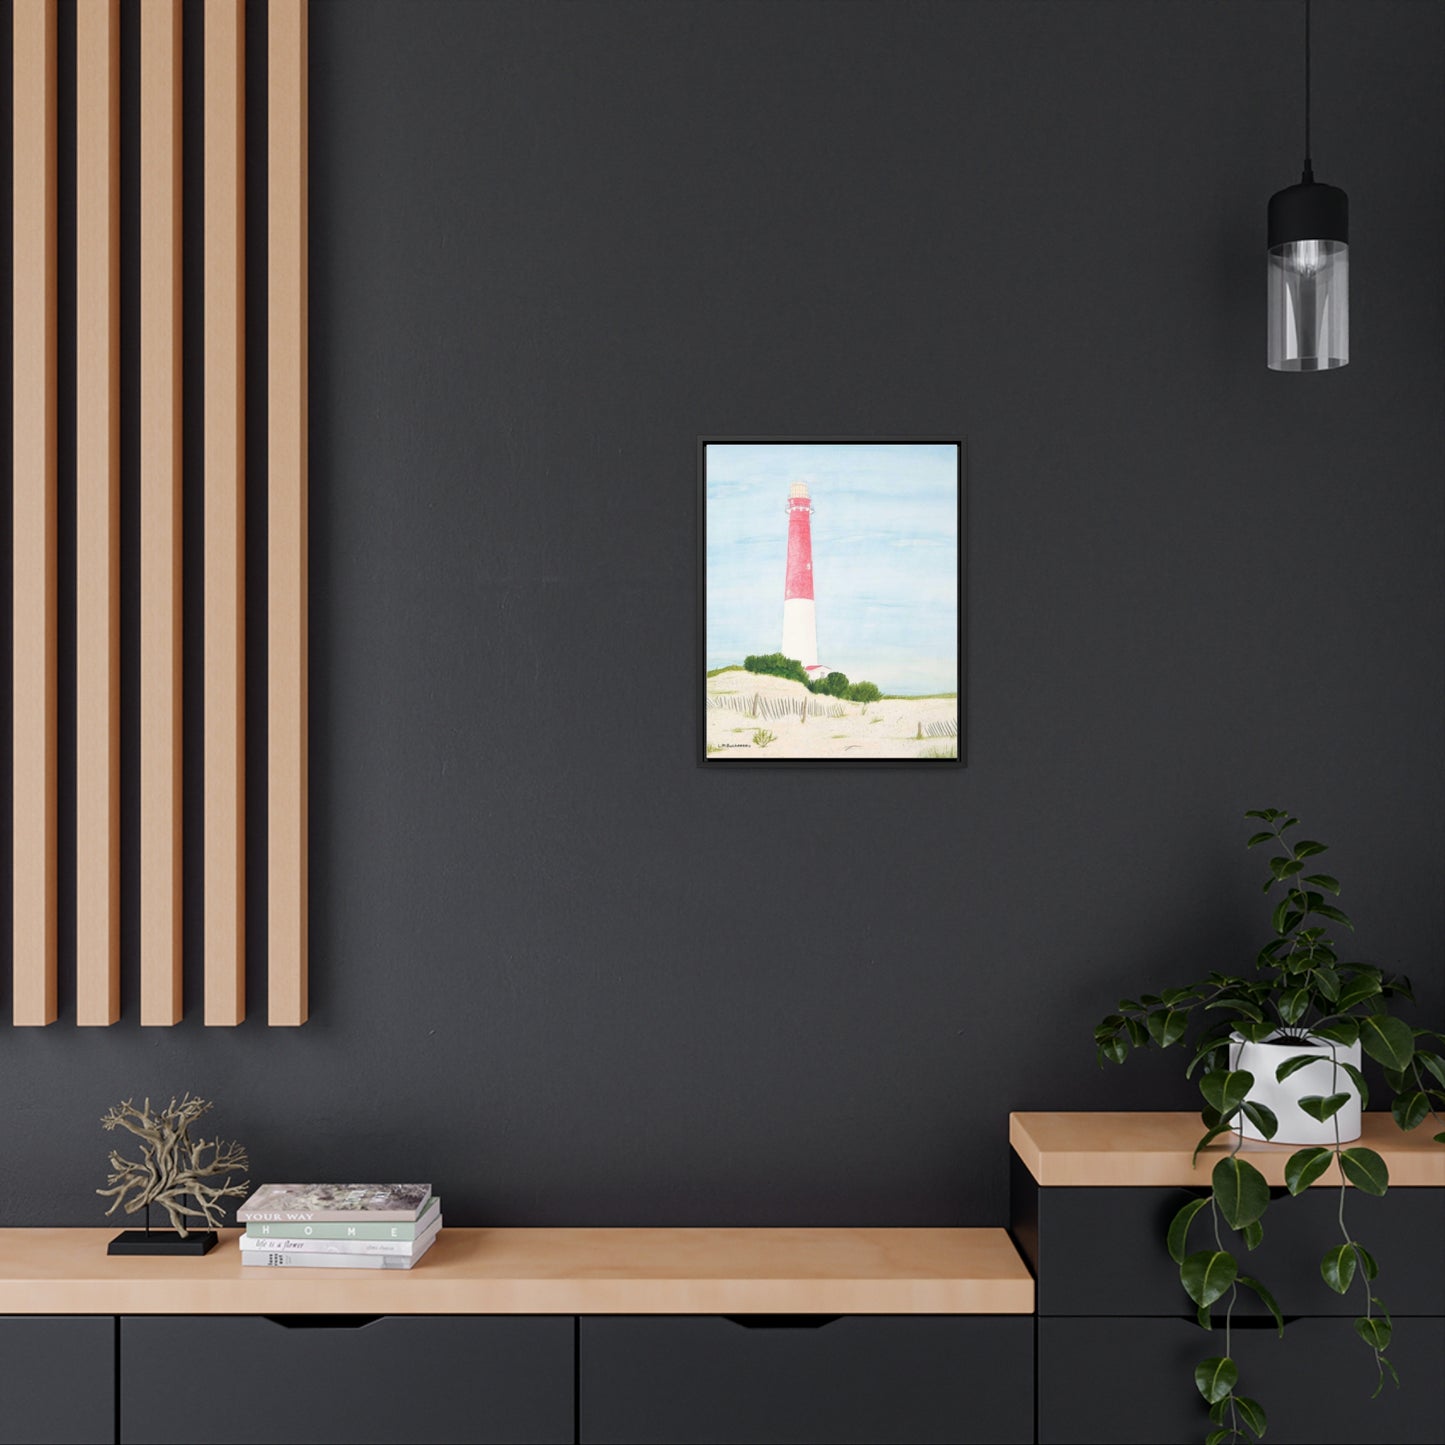 Barnegat Lighthouse Gallery Canvas Wraps